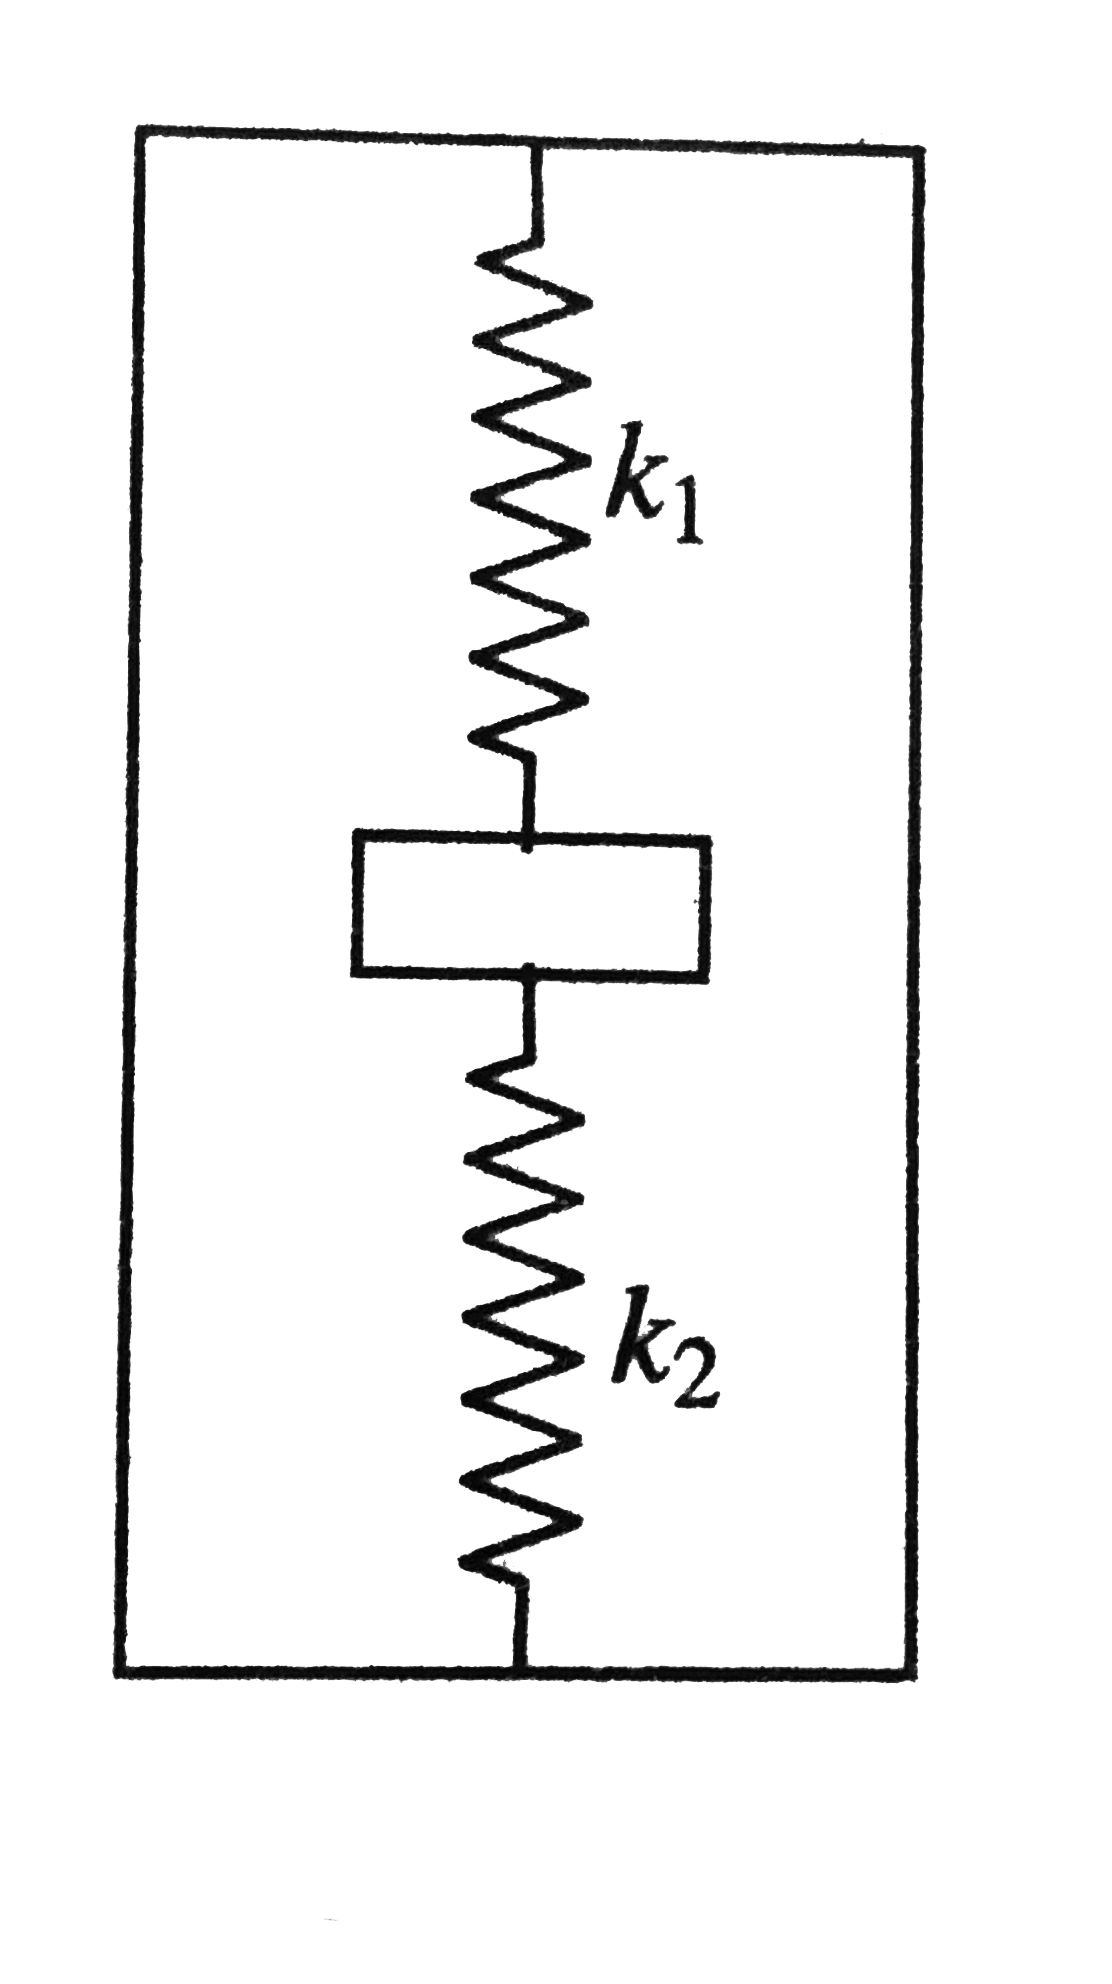 One end of a spring of force constant k1 is attached to the ceiling of an elevator. A block of mass 1.5kg is attached to the other end. Another spring of force constant k2 is attached to the bottom of the mass and to the floor of the elevator as shown in figure. At equilibrium, the deformation in both the spring is equal and is 40cm. If the elevator moves with constant acceleration upward, the additional deformation in both the spring is 8cm. Find the elevator's accelerationn ( g=10ms^-2).